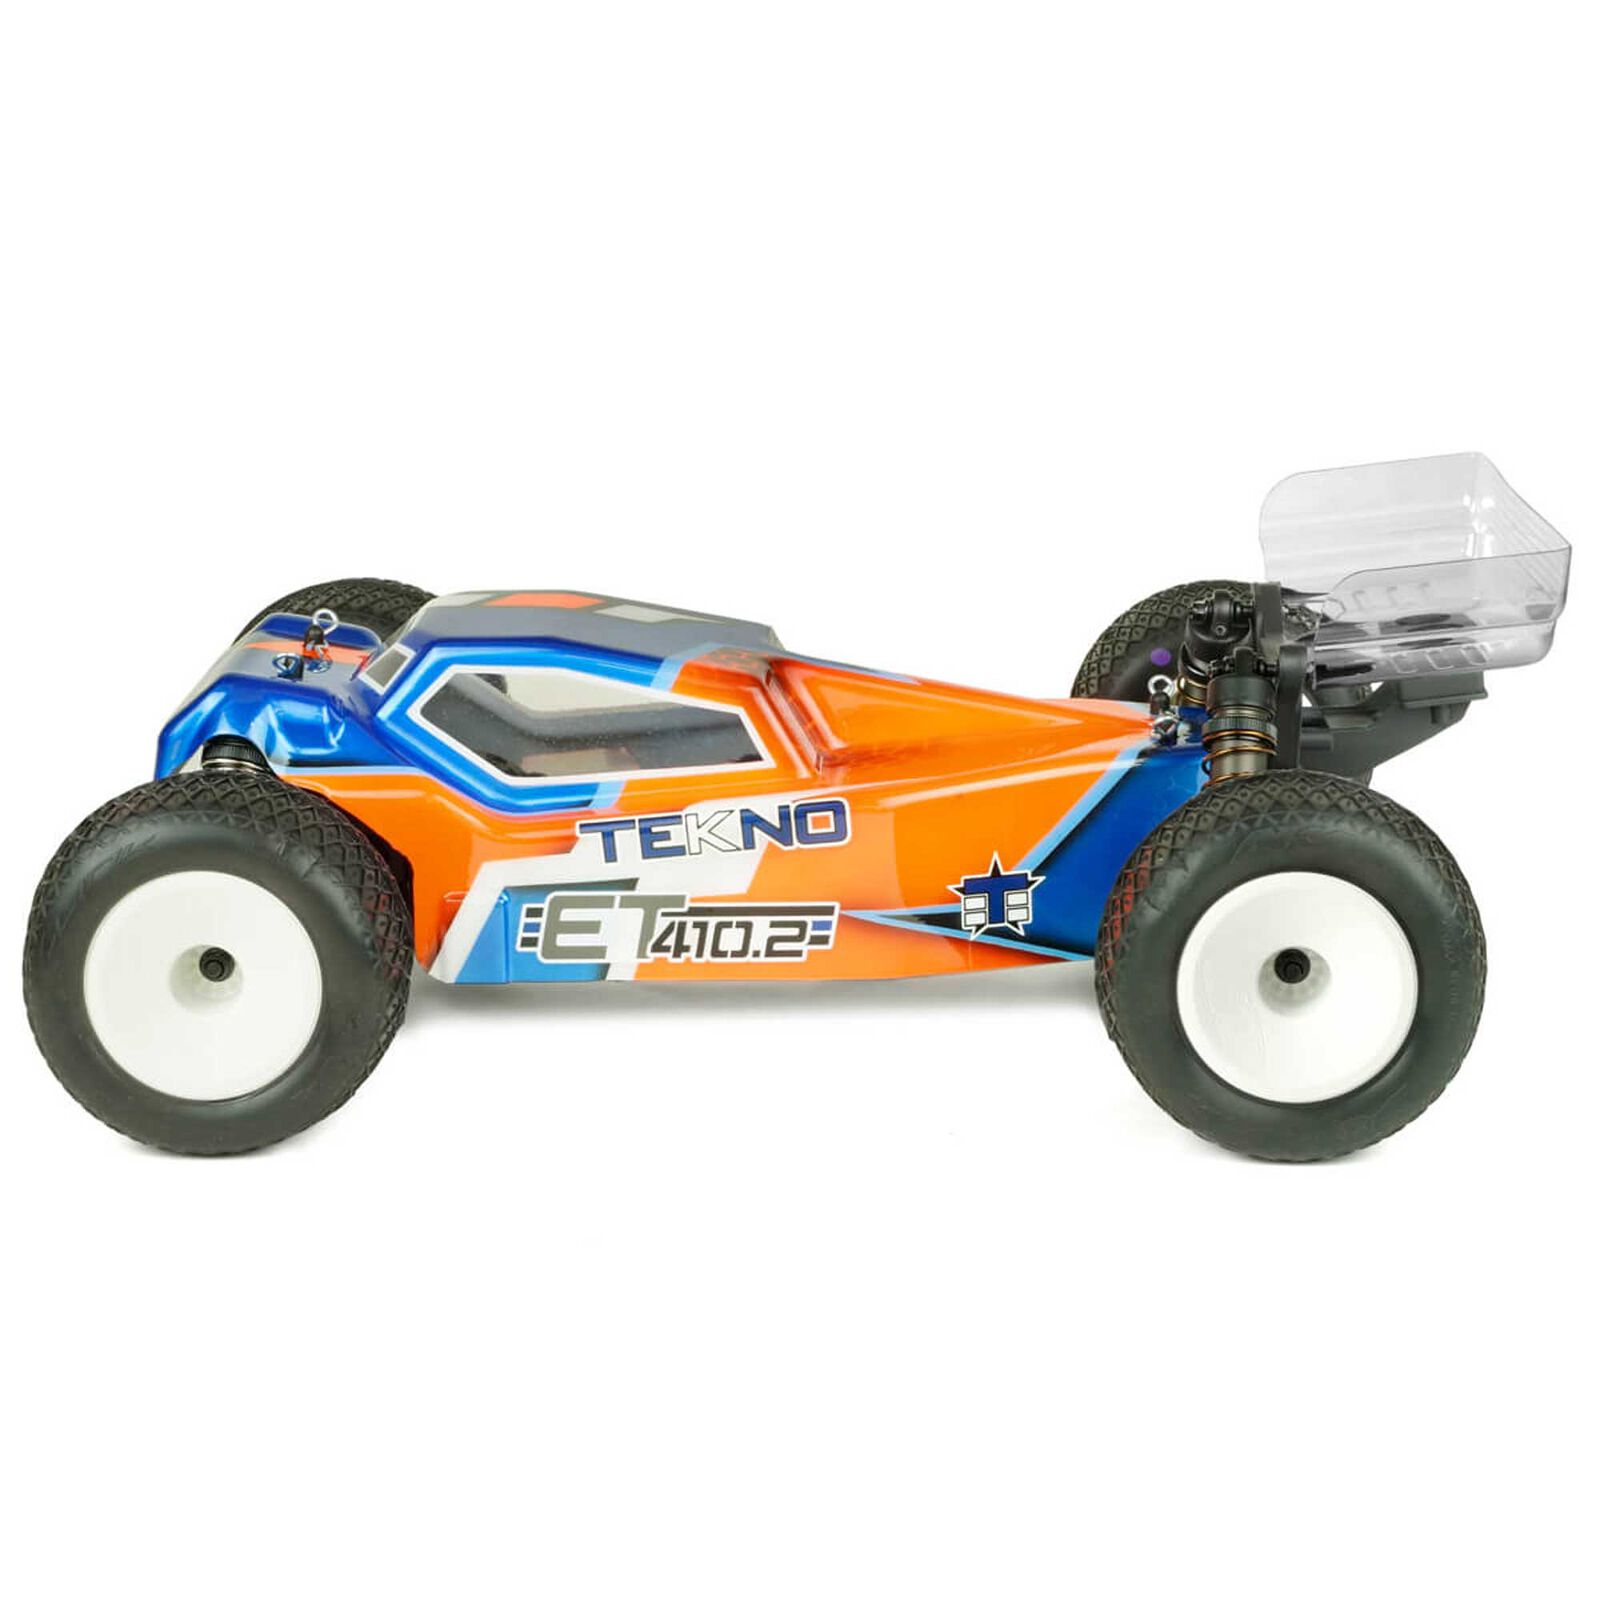 Tekno RC ET410.2 1/10th 4WD Competition Electric Truggy Kit for sale online TKR7202